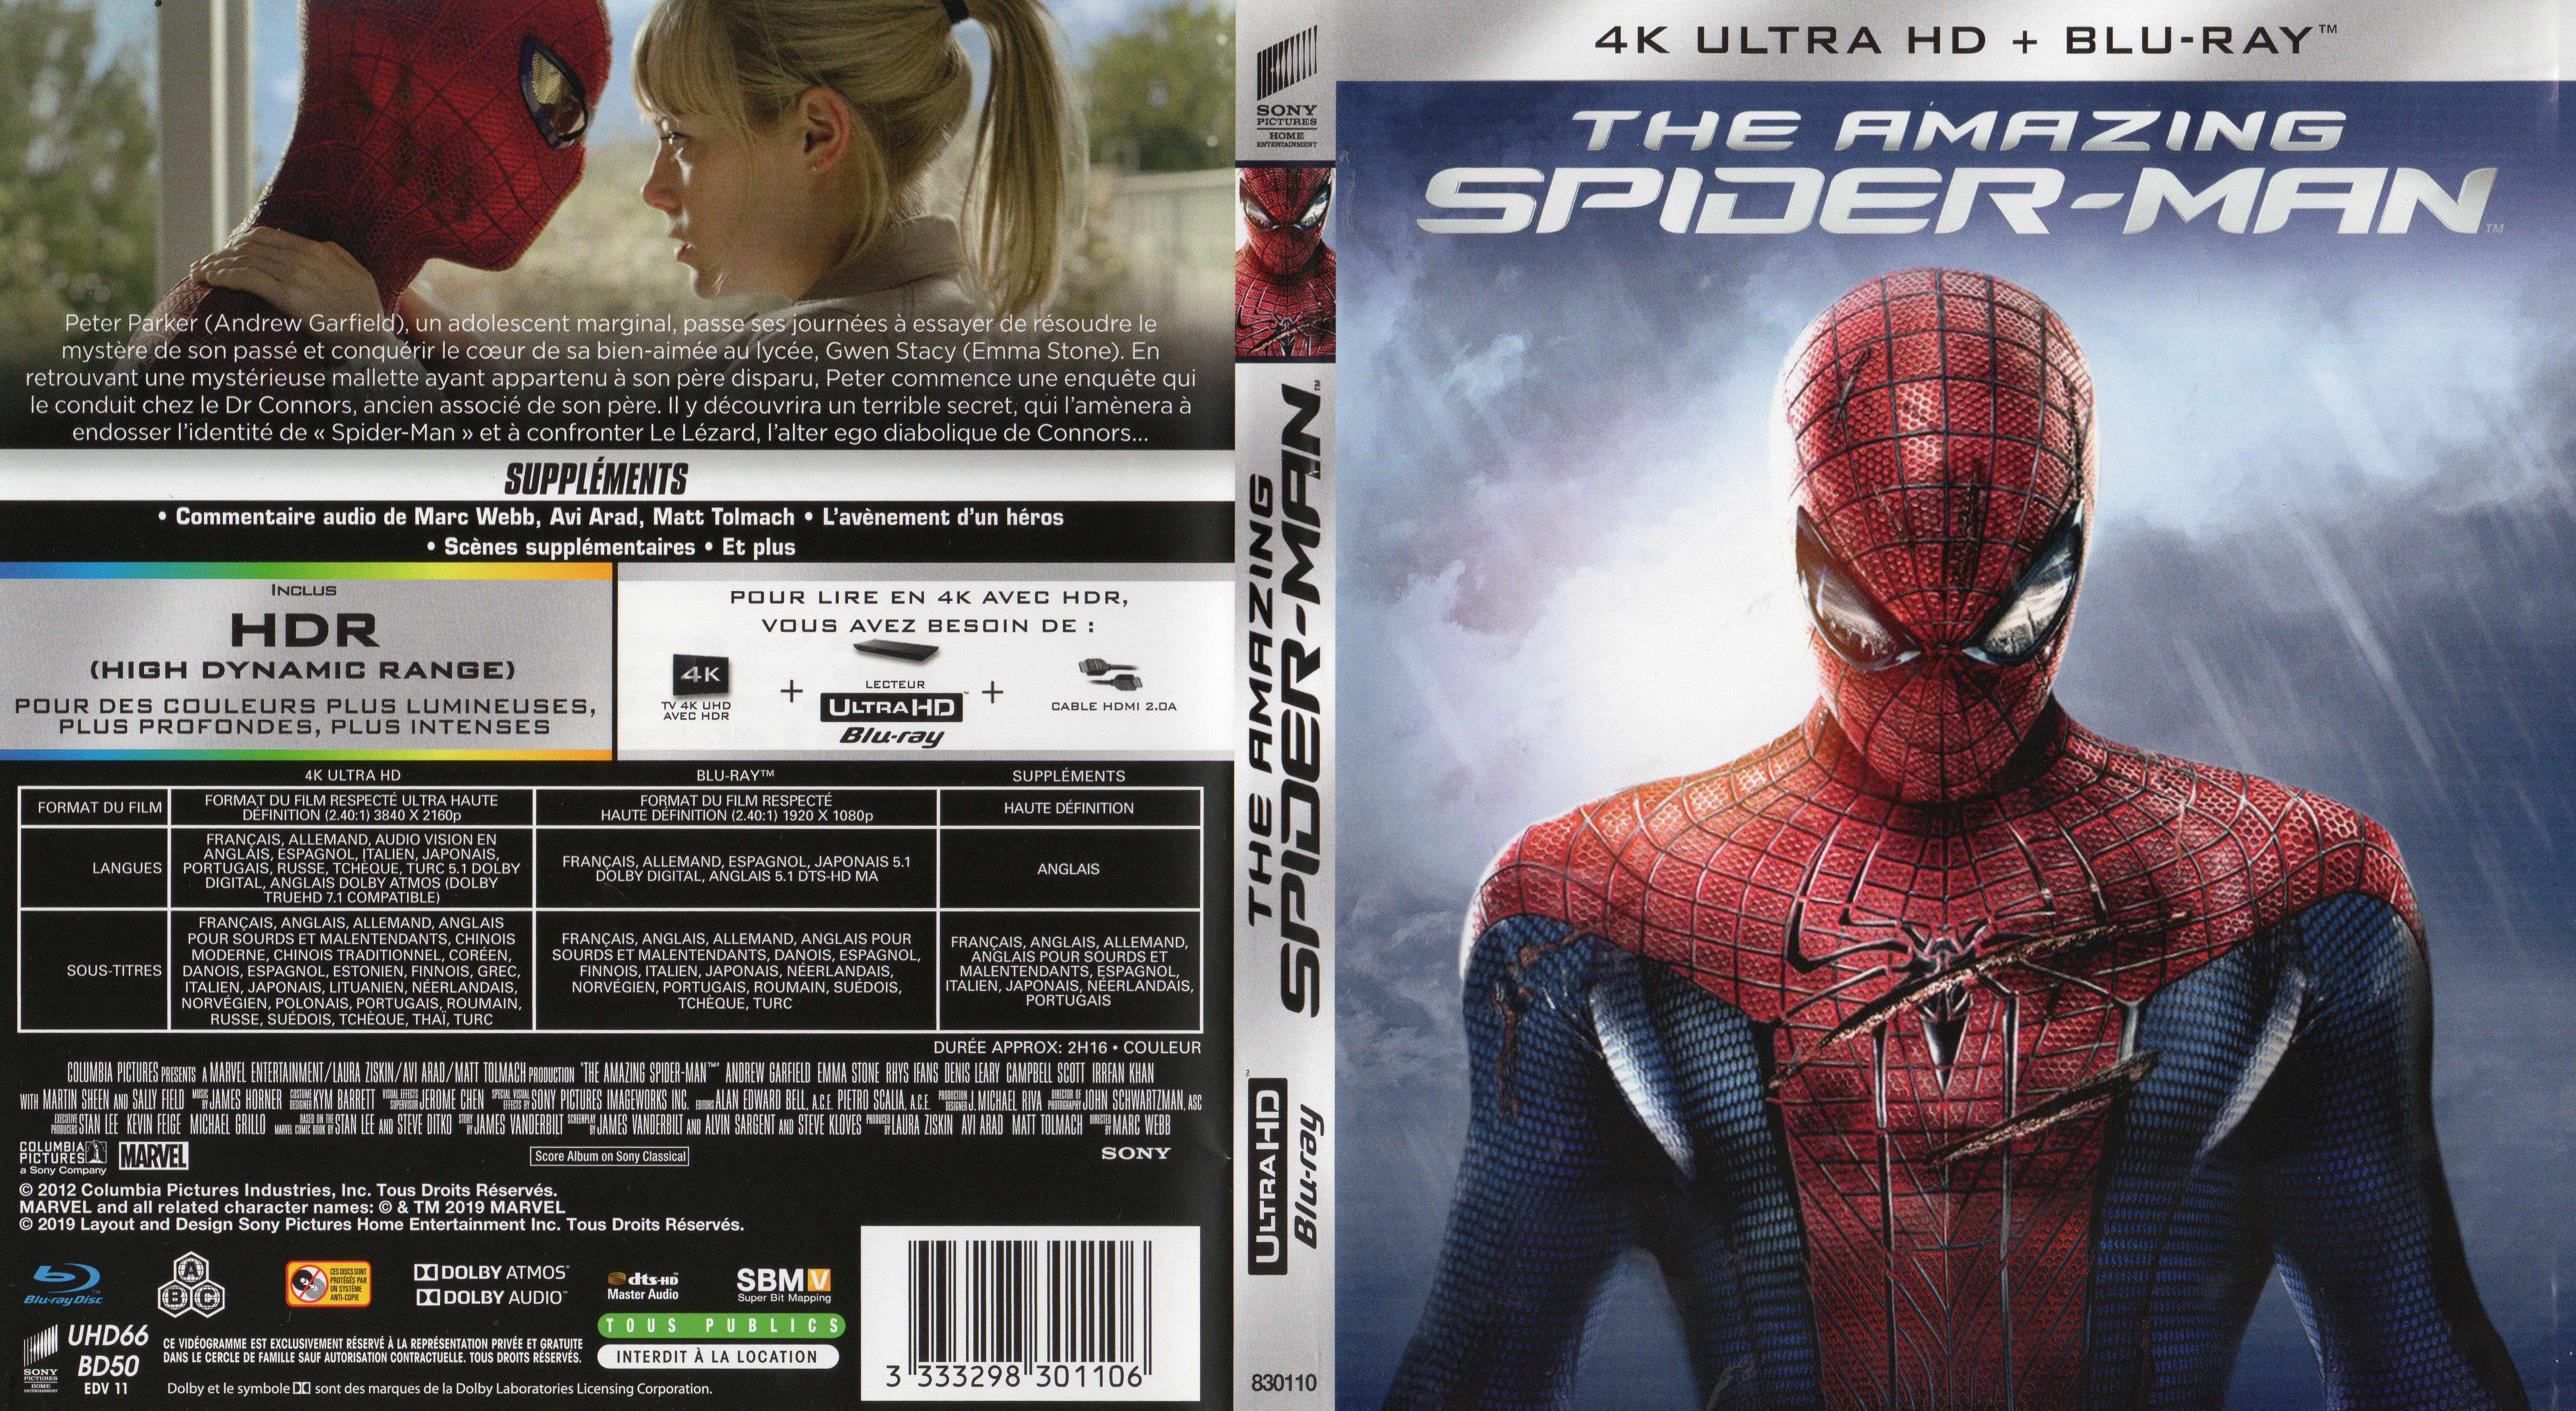 Jaquette DVD The amazing spider-man 4K (BLU-RAY) v2